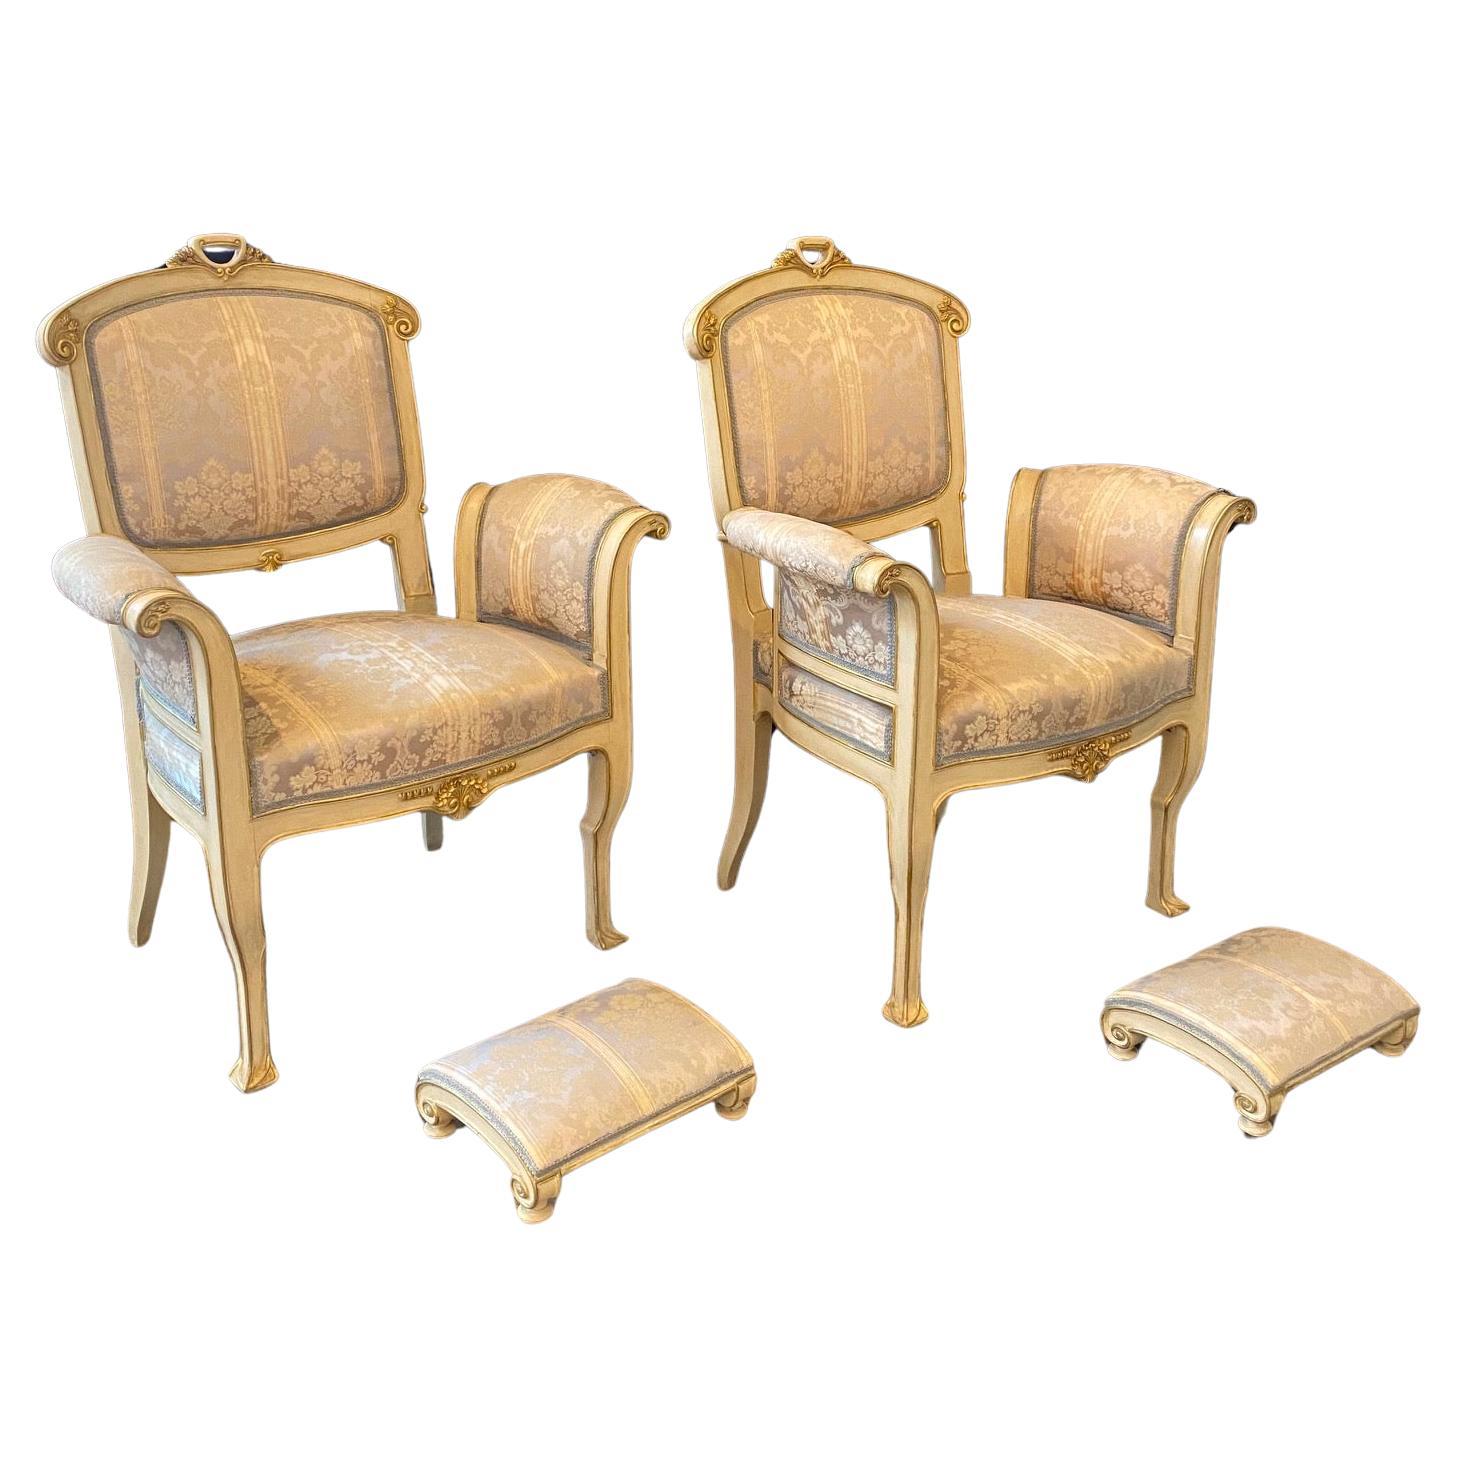 Pair of lovely and elegant Art Nouveau Italian armchairs or fauteuils with exquisite footstools, all with beautiful original muted striped damask fabric. Part of a 10-piece early 20th century Art Nouveau complete original salon suite set hand carved